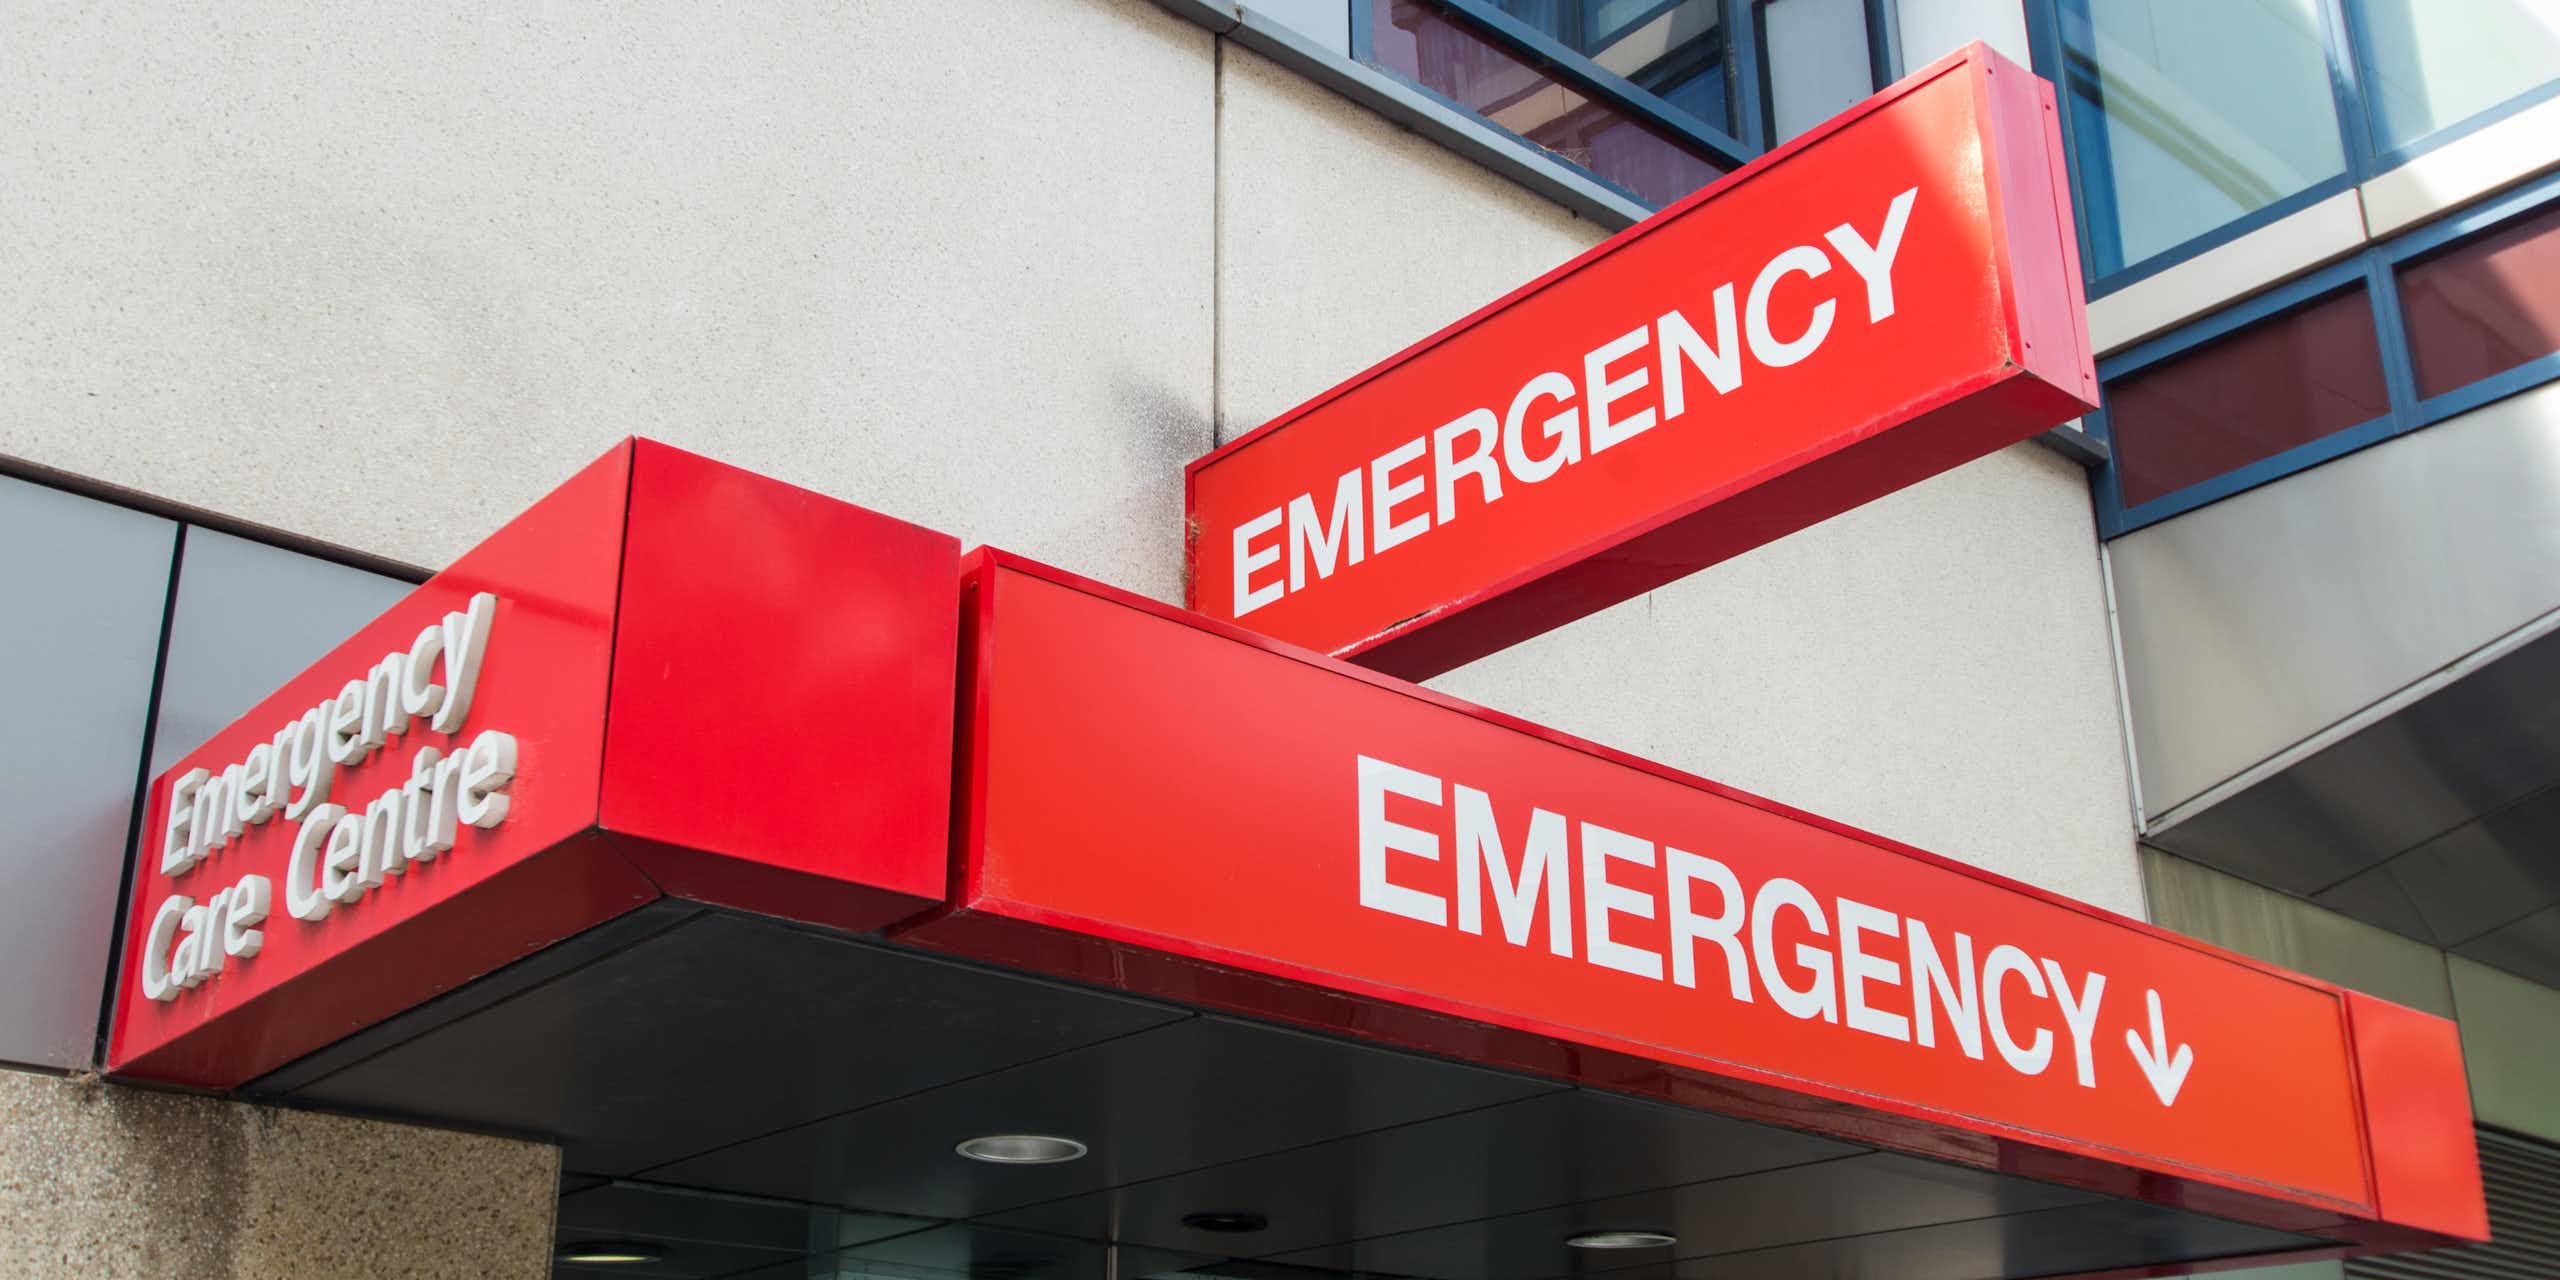 Red signs with white lettering reading 'emergency' outside building entrance